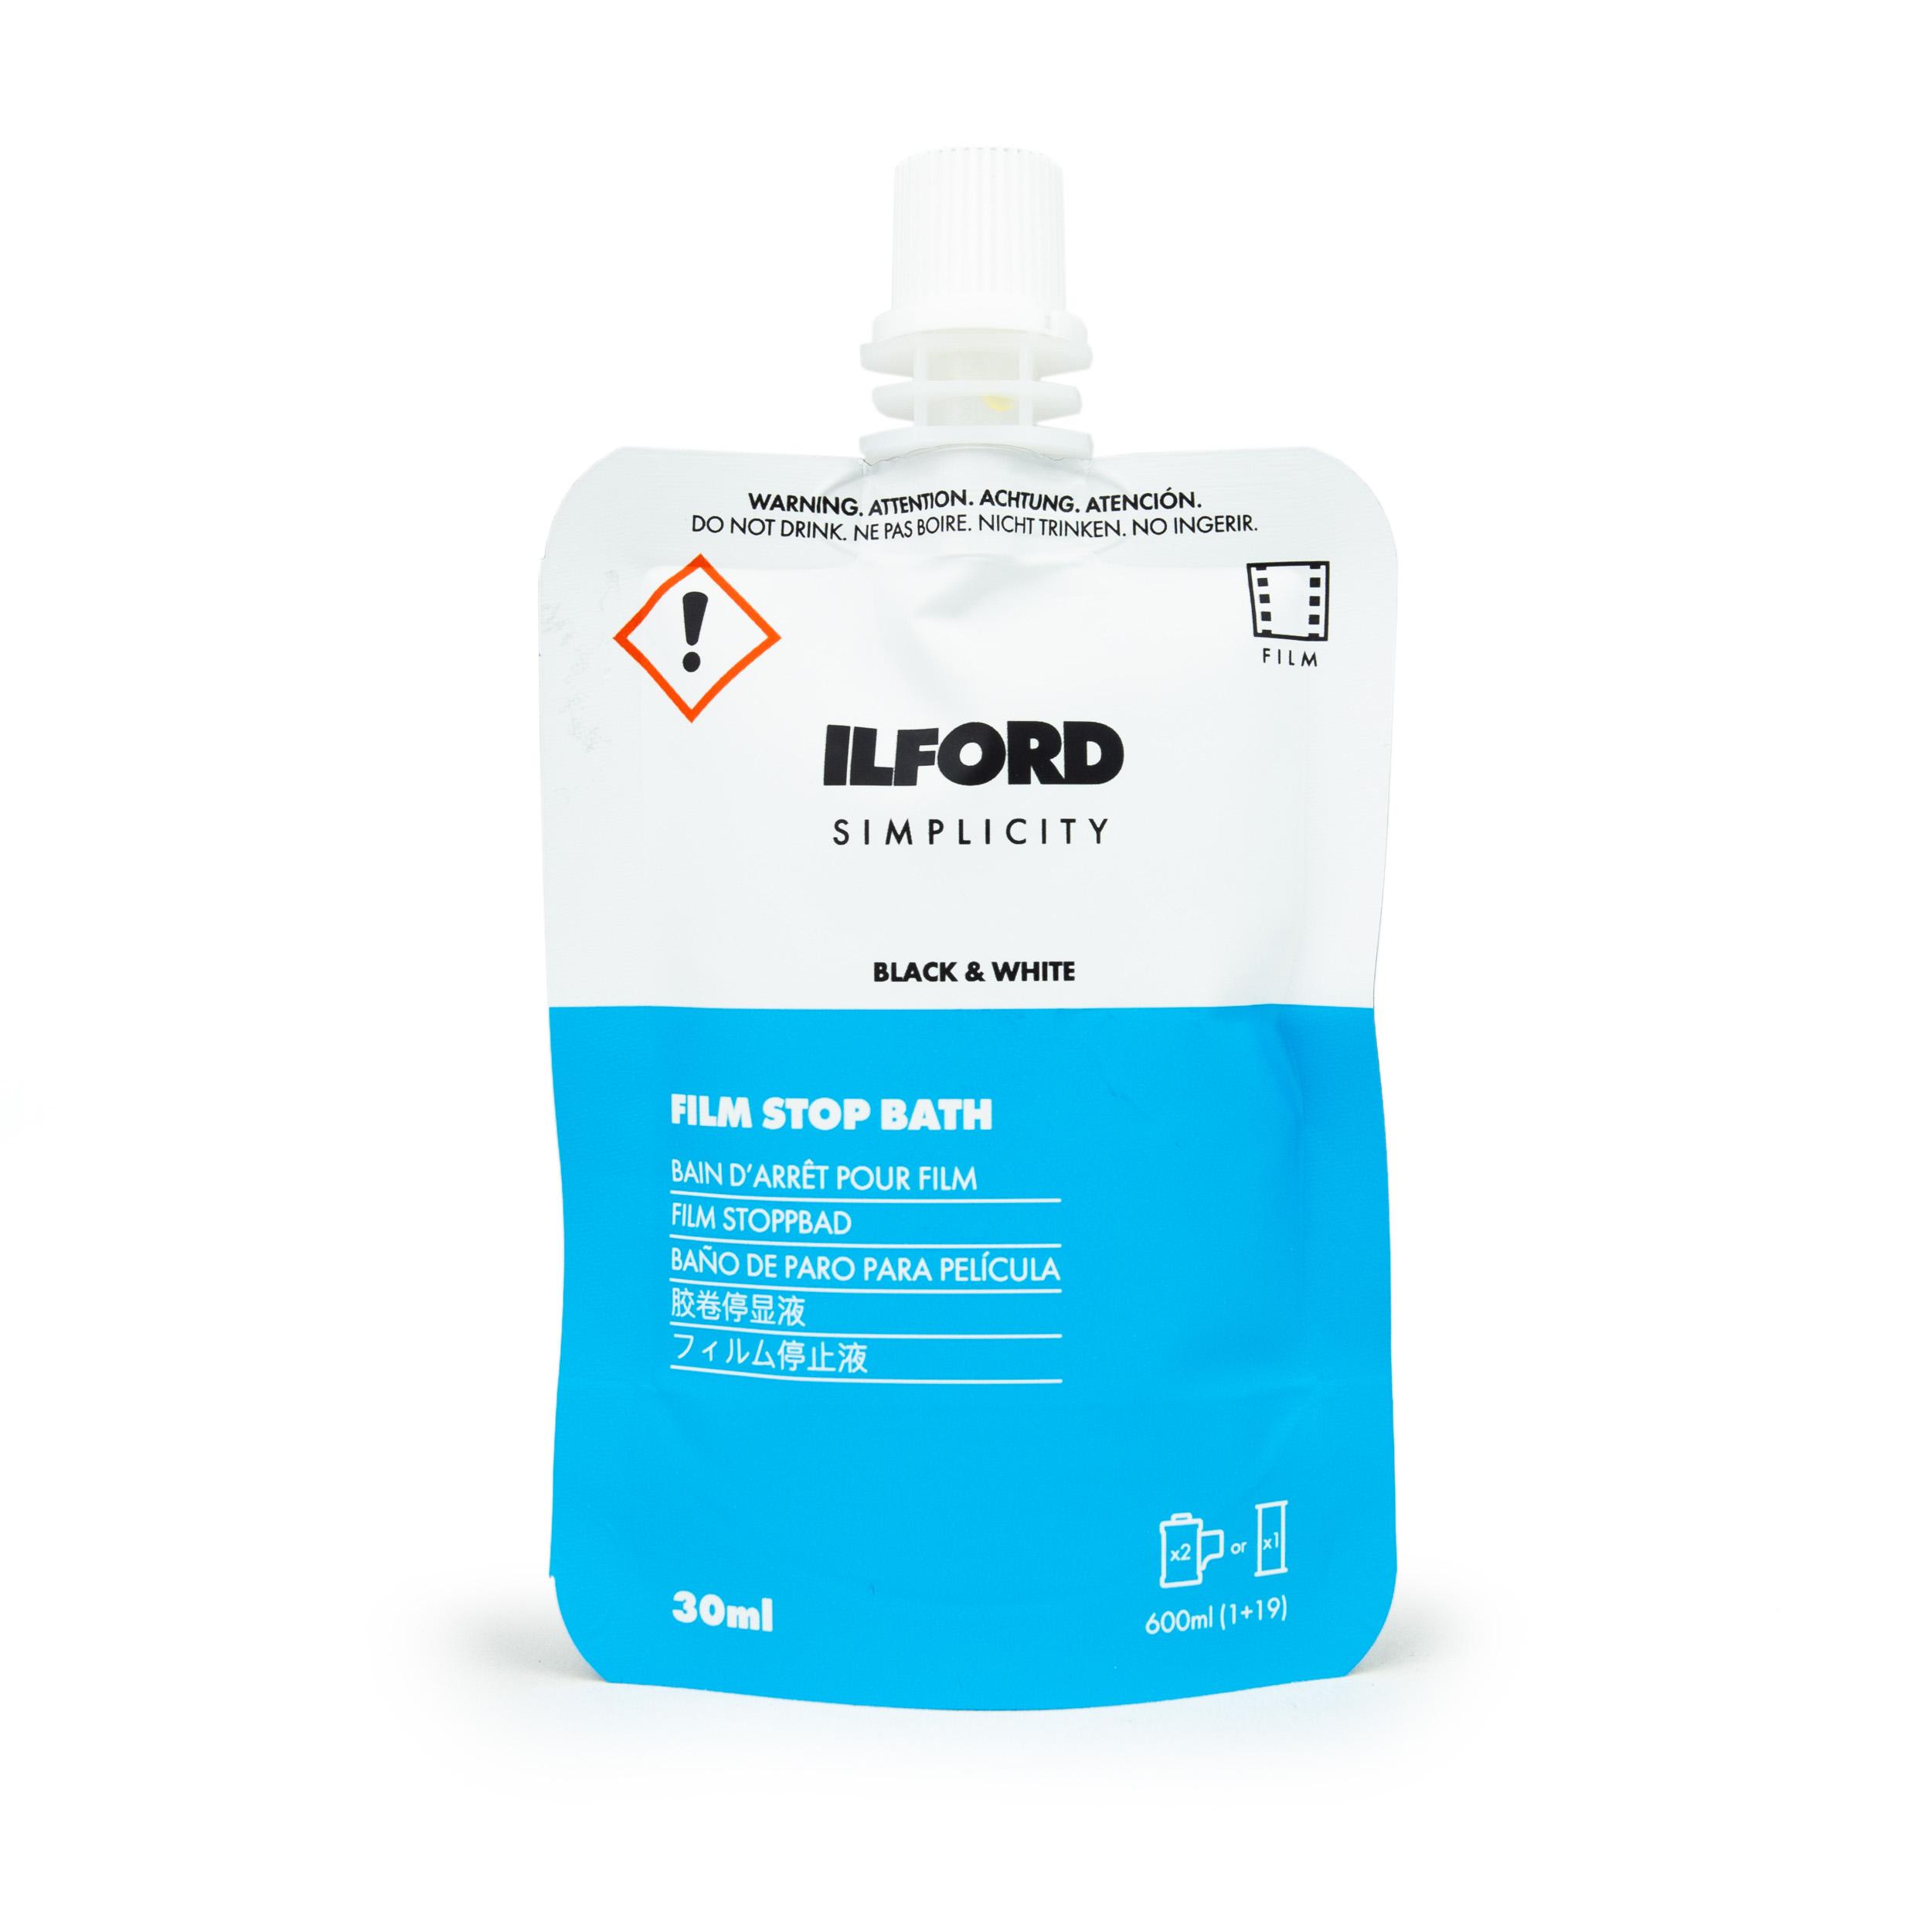 Ilford Simplicity Stoppbad 1x30ml